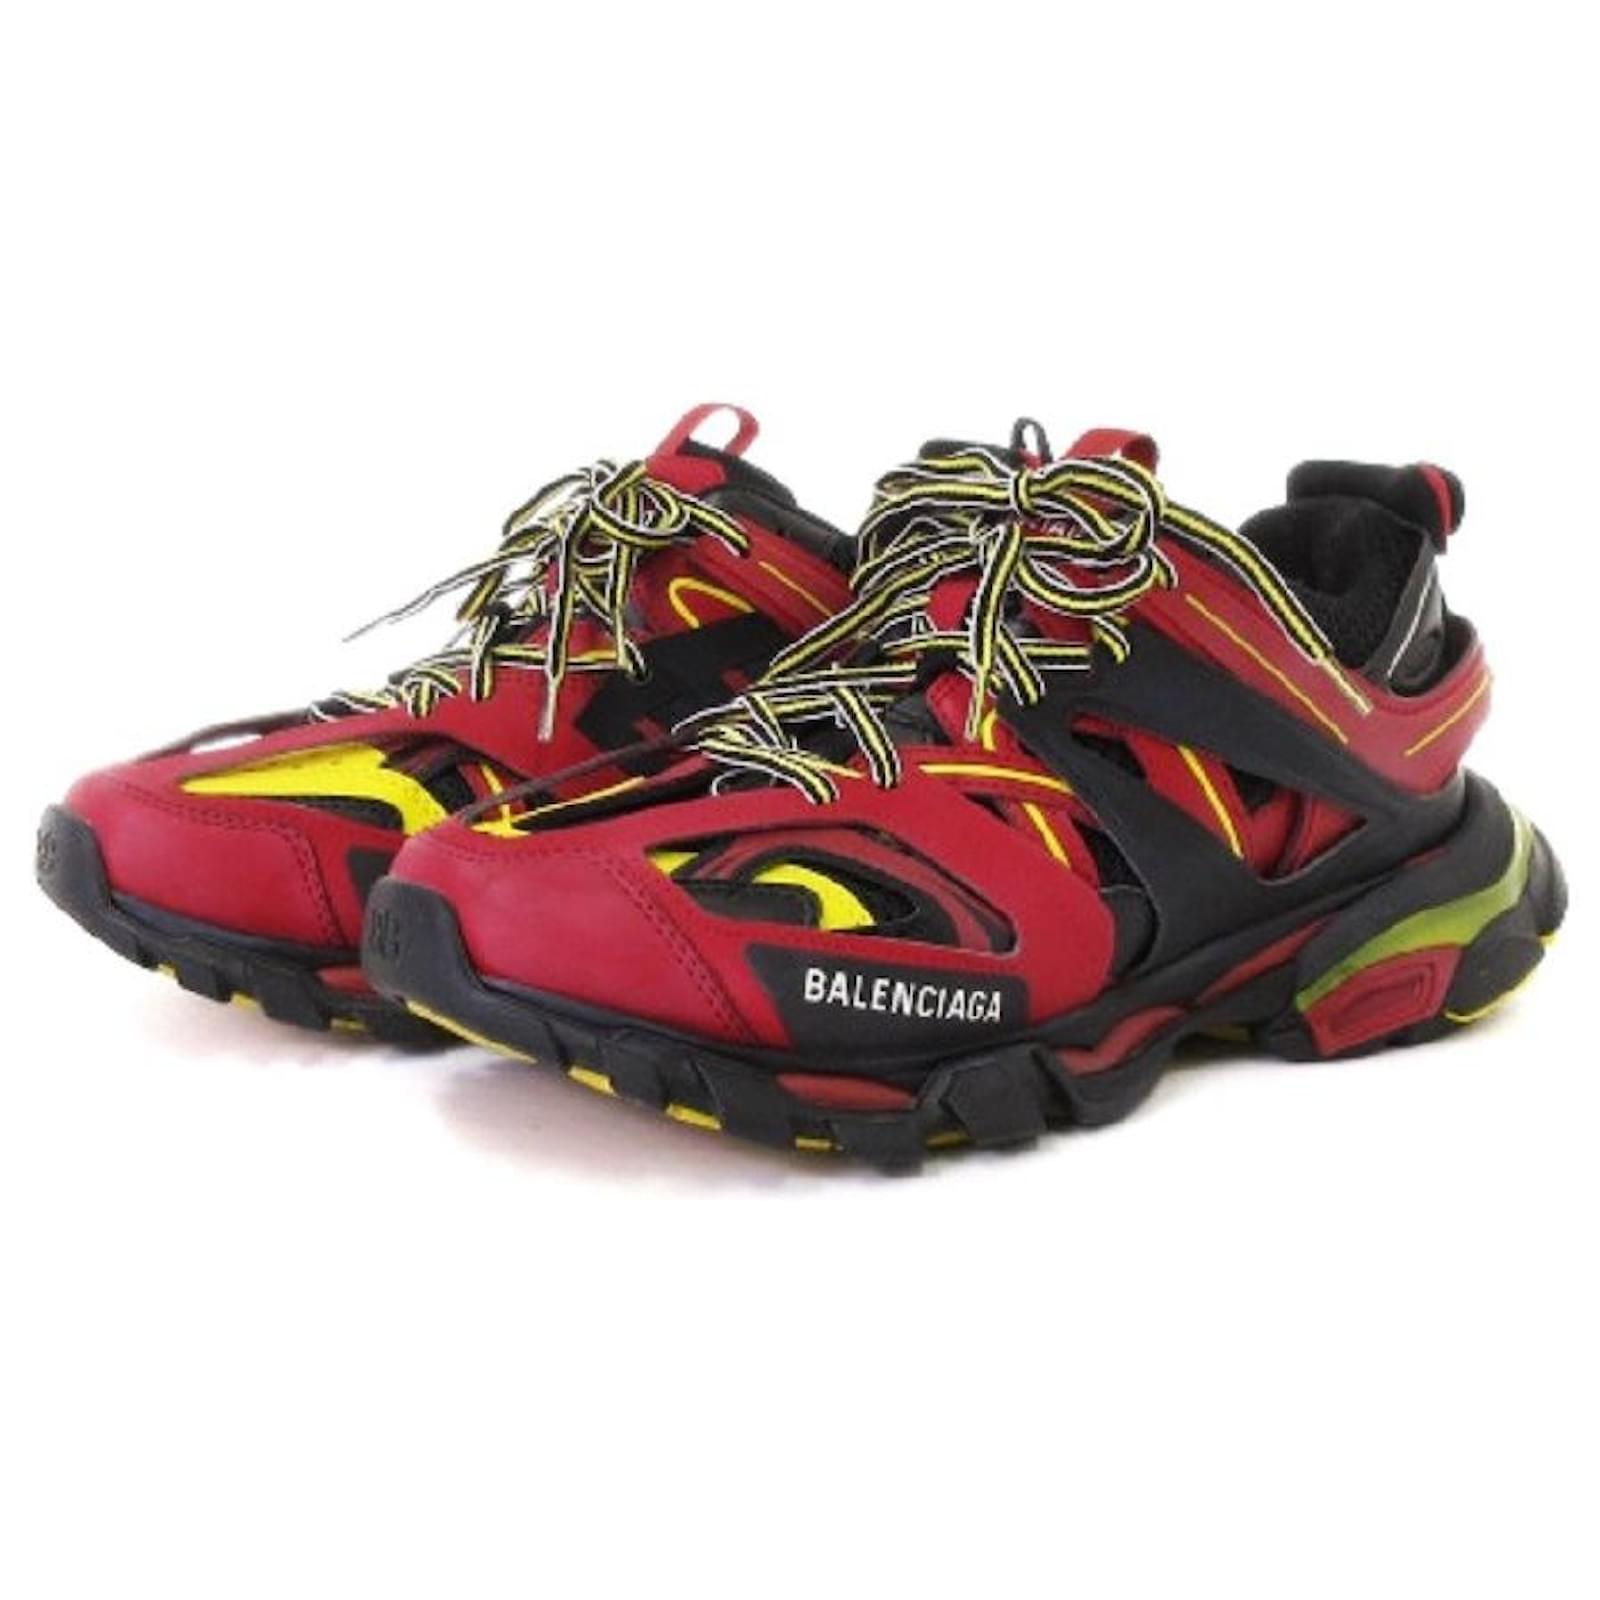 Used] Balenciaga BALENCIAGA TRACK TRAINERS SNEAKER track trainer sneakers 542023 red red 41 27 shoes ☆ AA Black Yellow Rubber ref.458434 - Joli